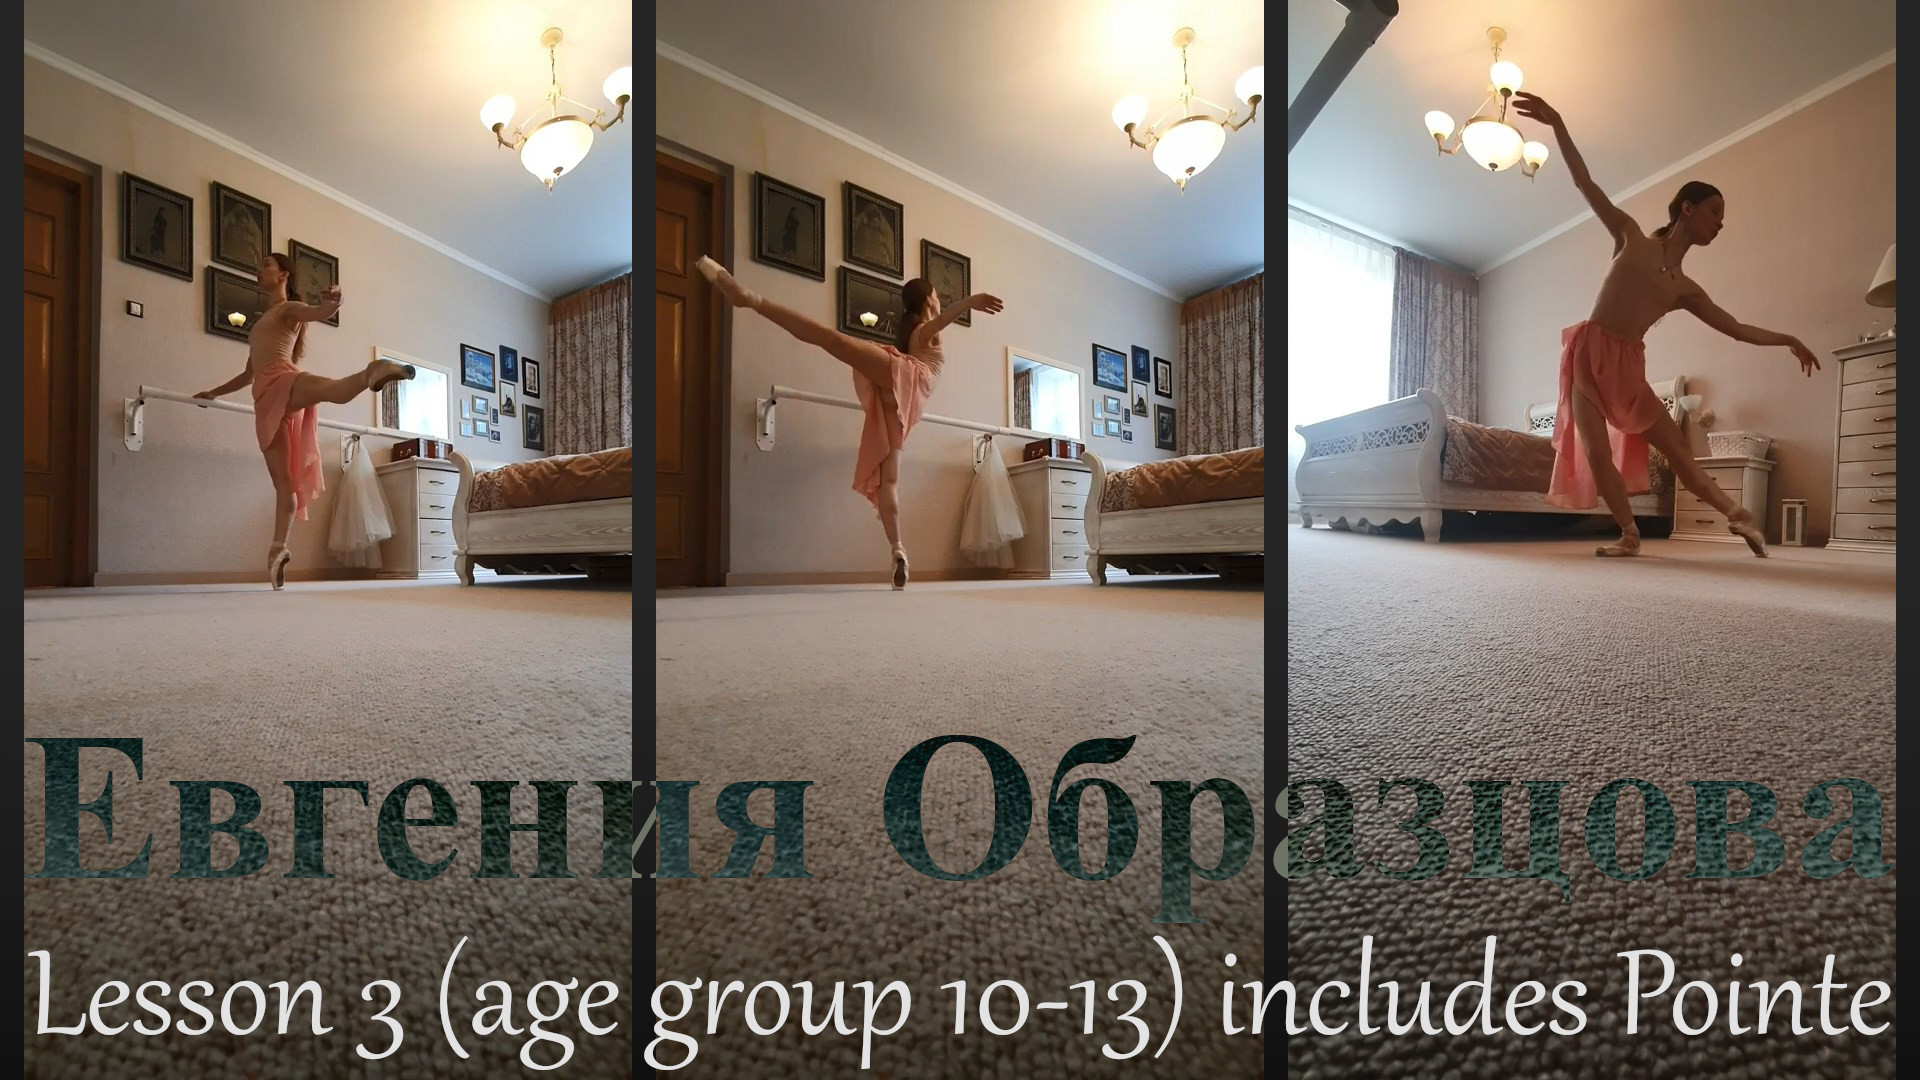 Evgenia Obraztsova - Lesson 3 Younger Group with Pointe